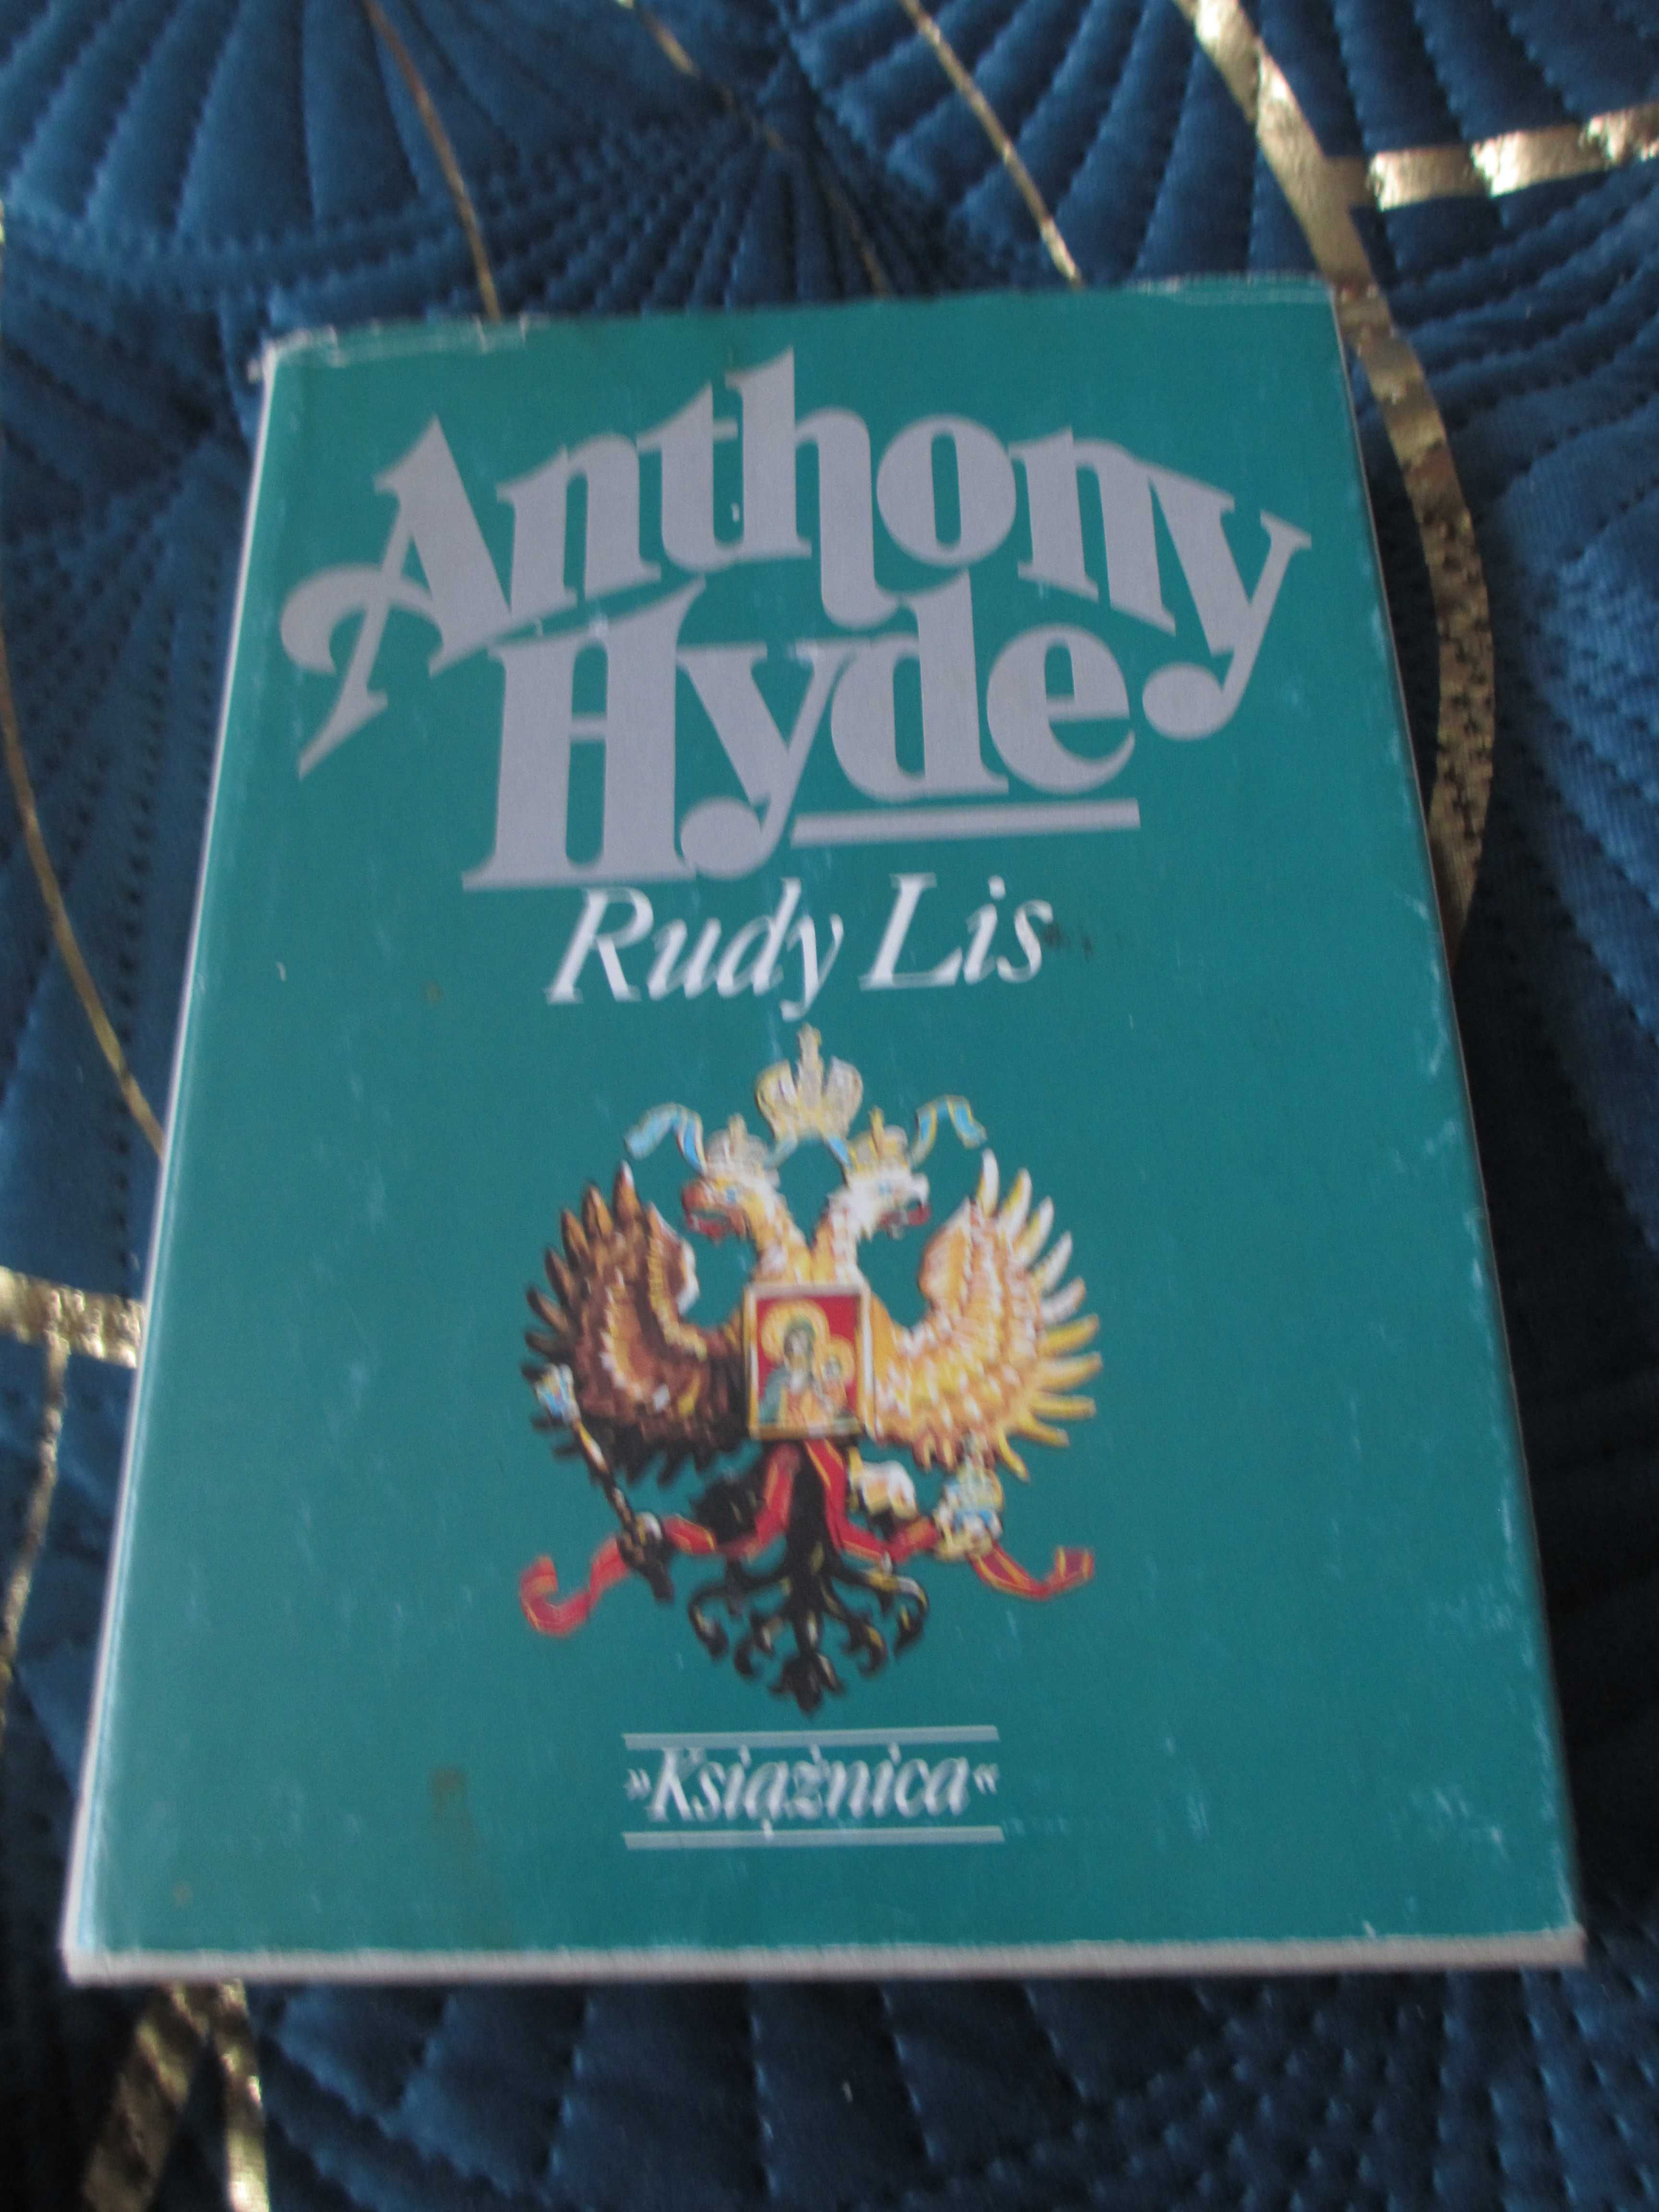 Rudy lis - Anthony Hyde